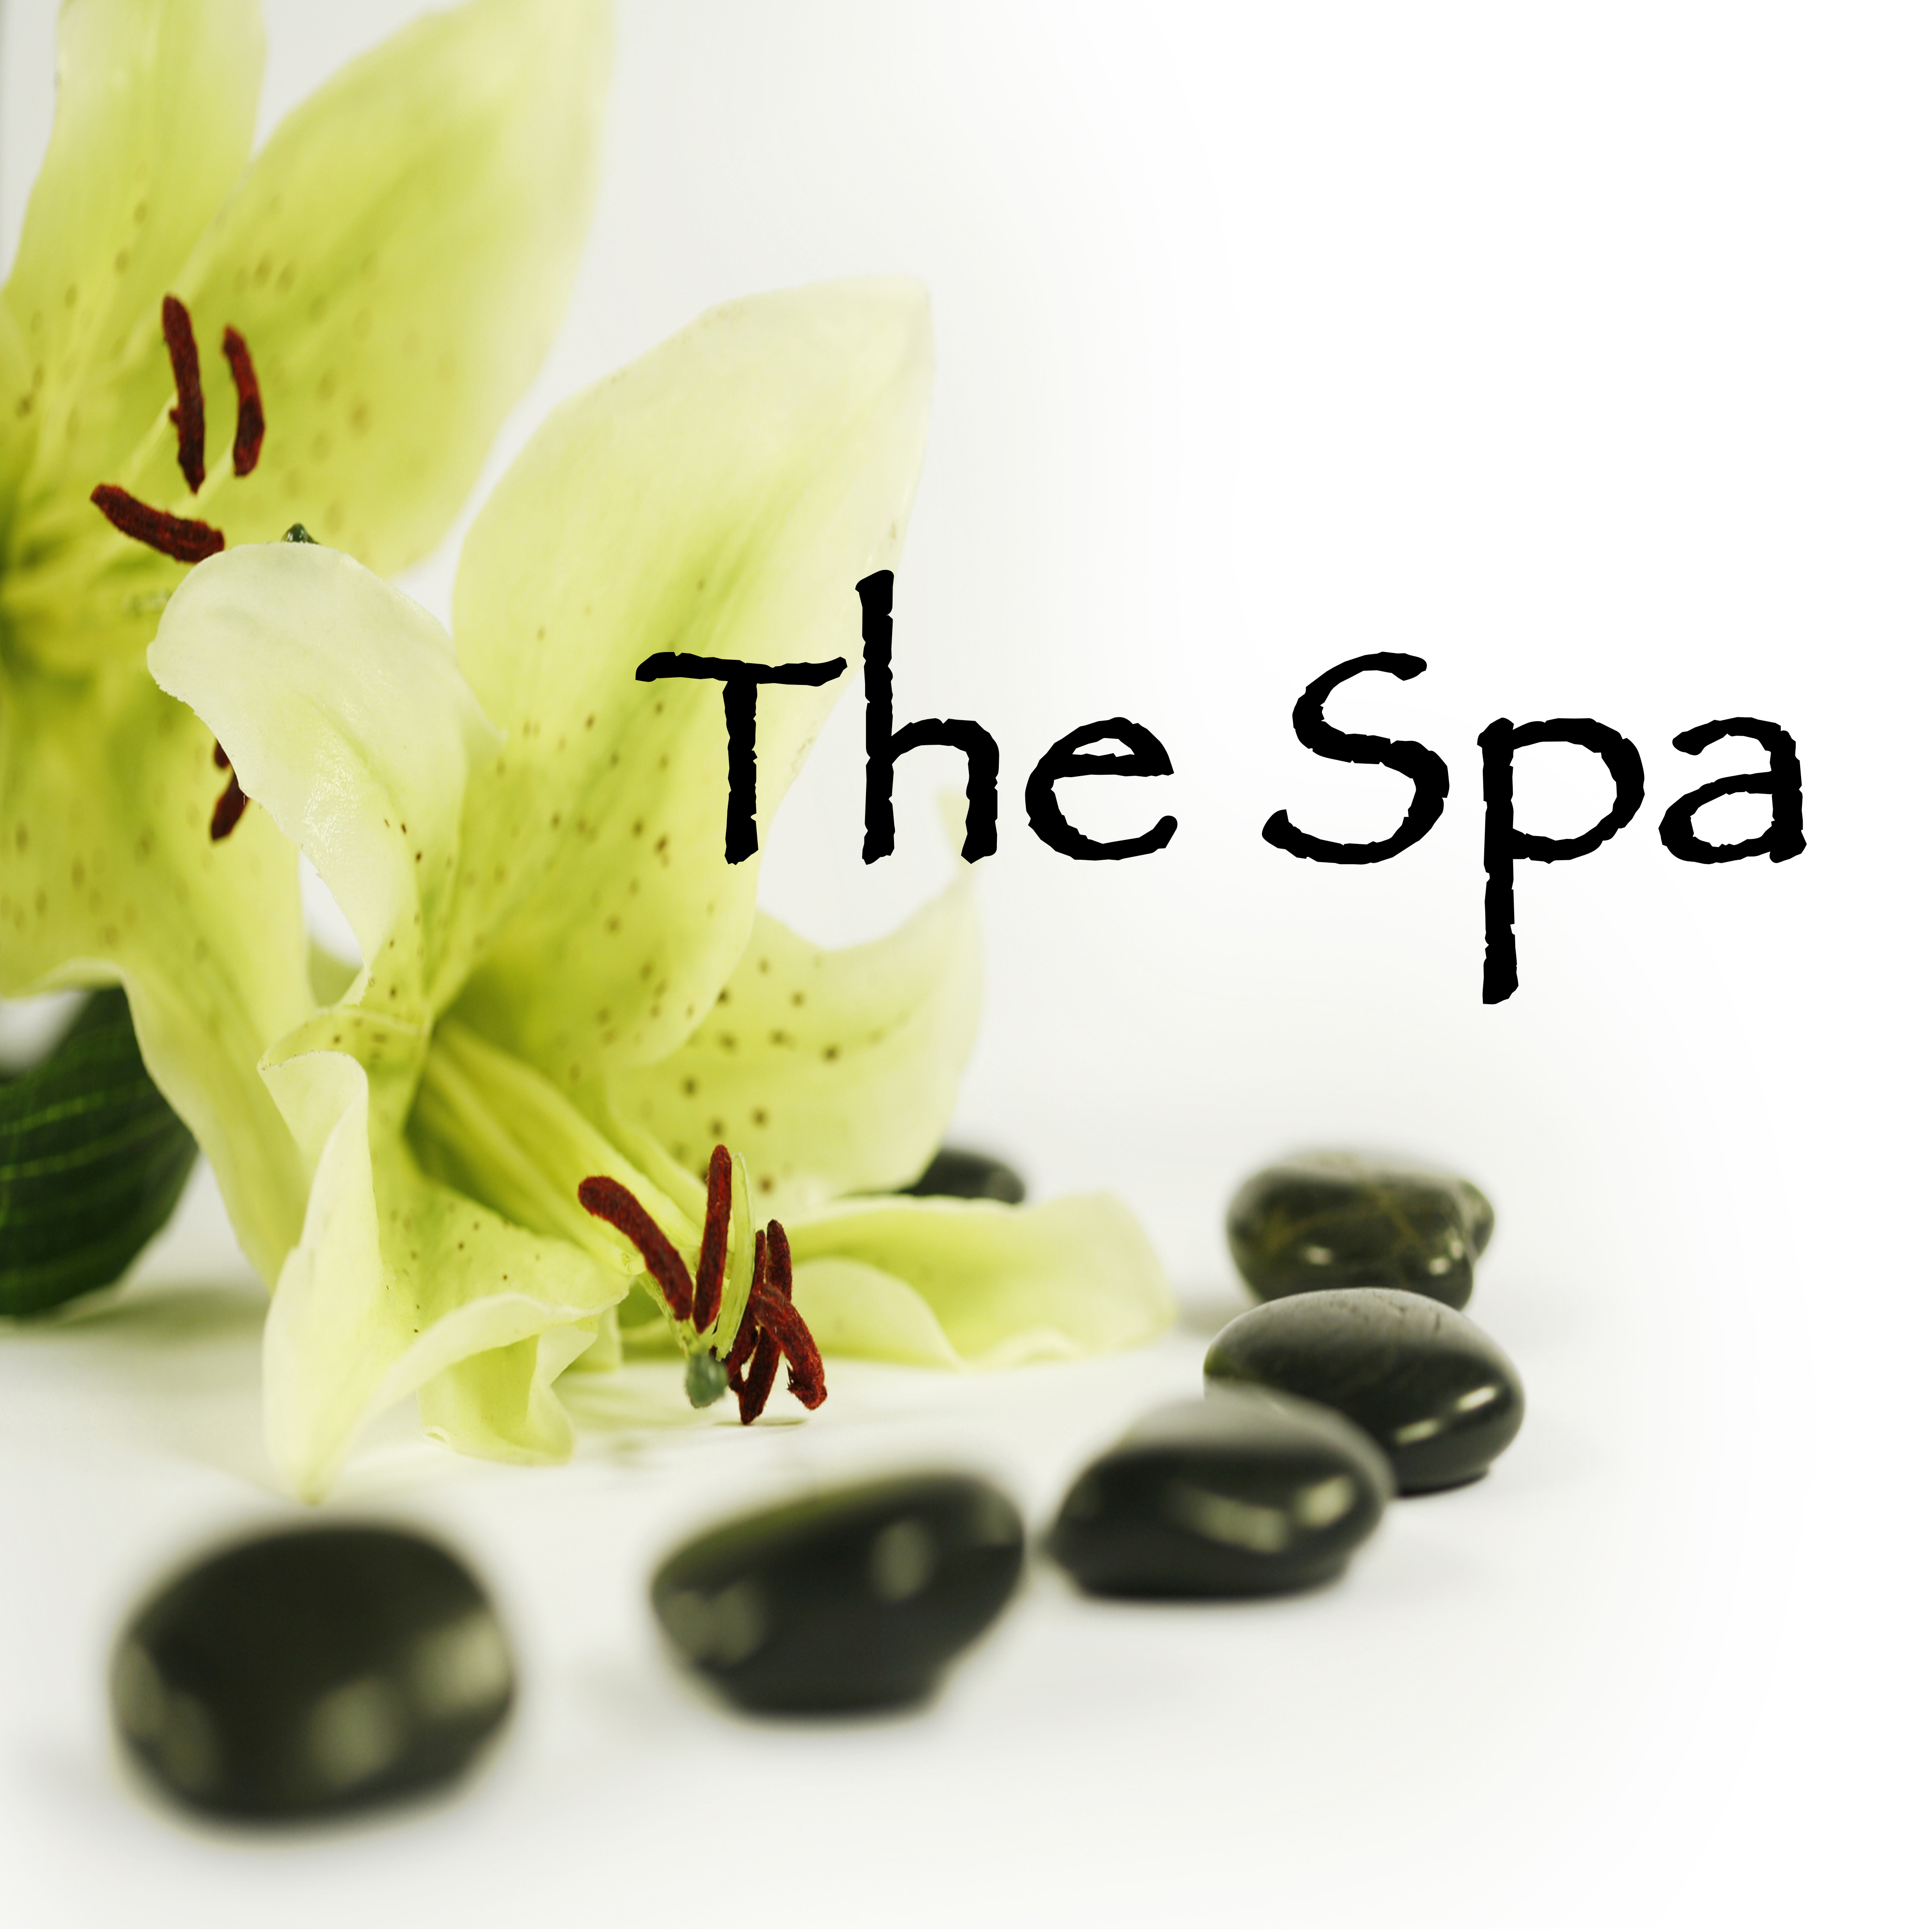 The Spa – Amazing Relax Music for Spa Treatments in Wellness Center & Spa Retreats